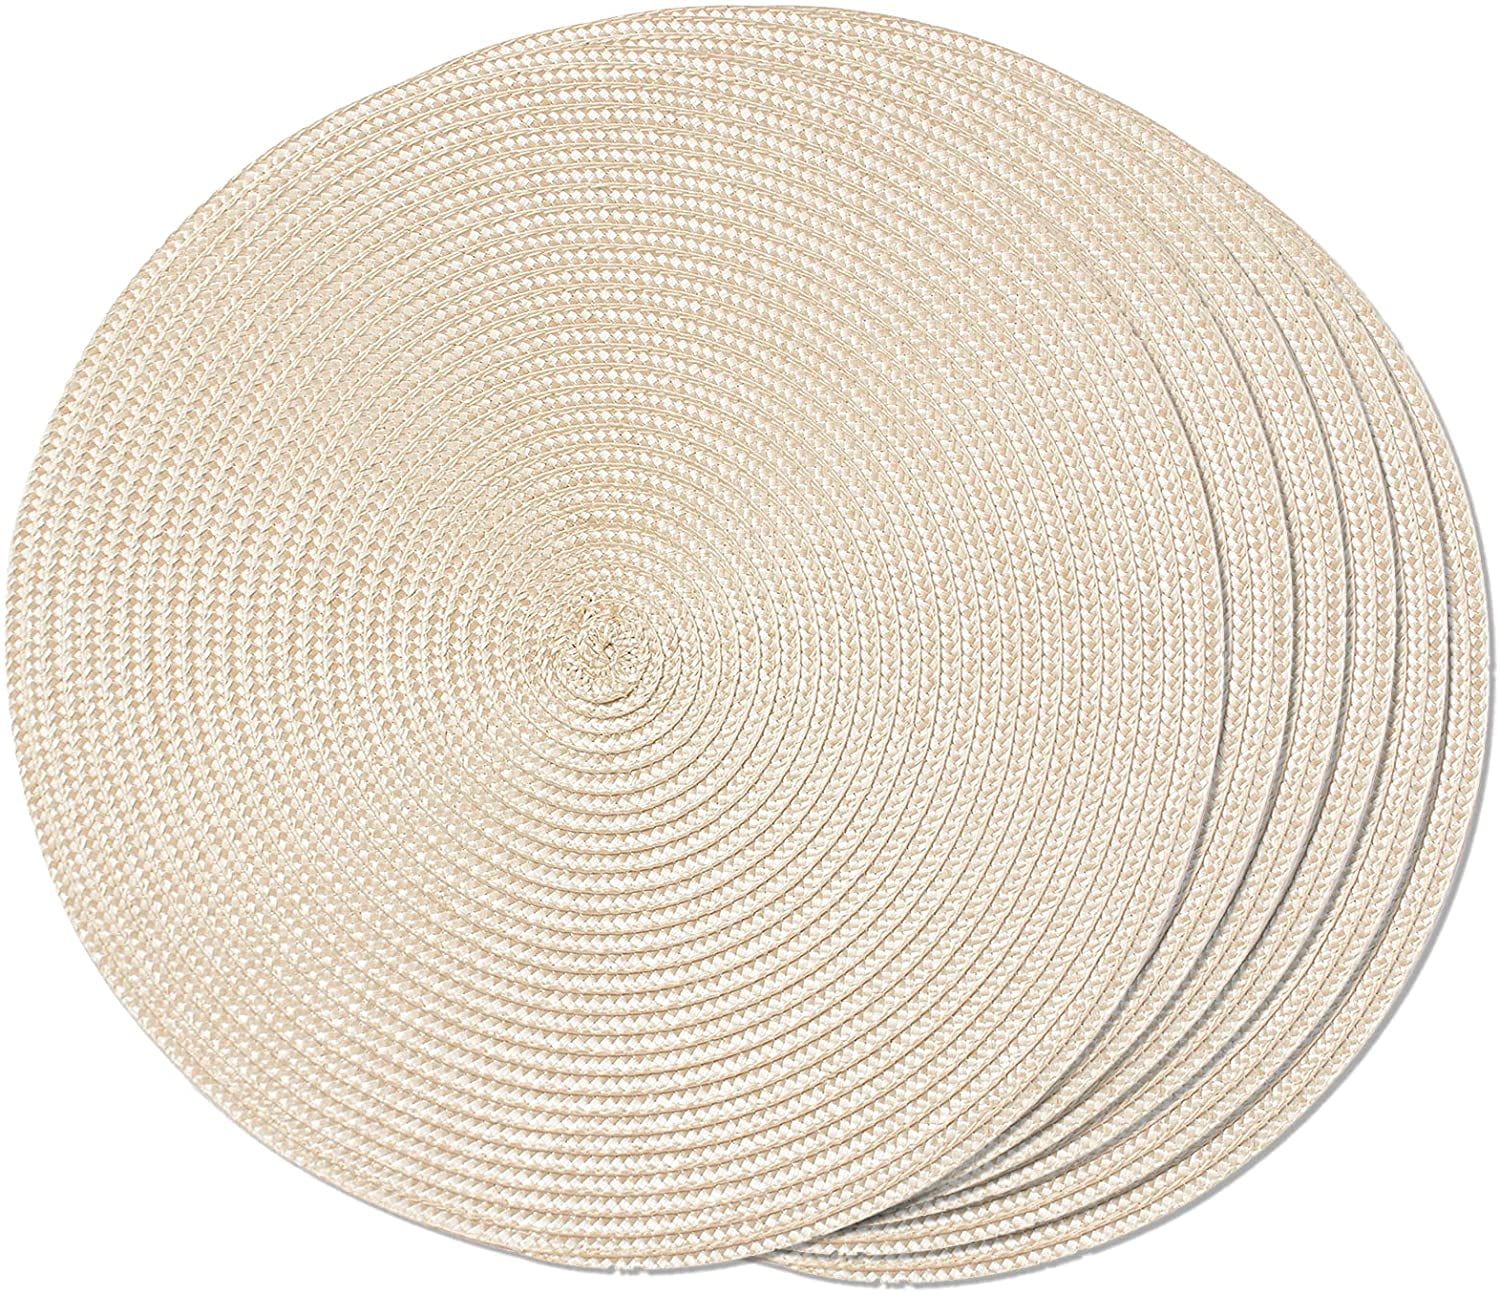 FunWheat Round Braided Placemats Set of 6 Table Mats for Dining Tables Woven Washable Non-Slip Place mats 15 Inch（Black） 